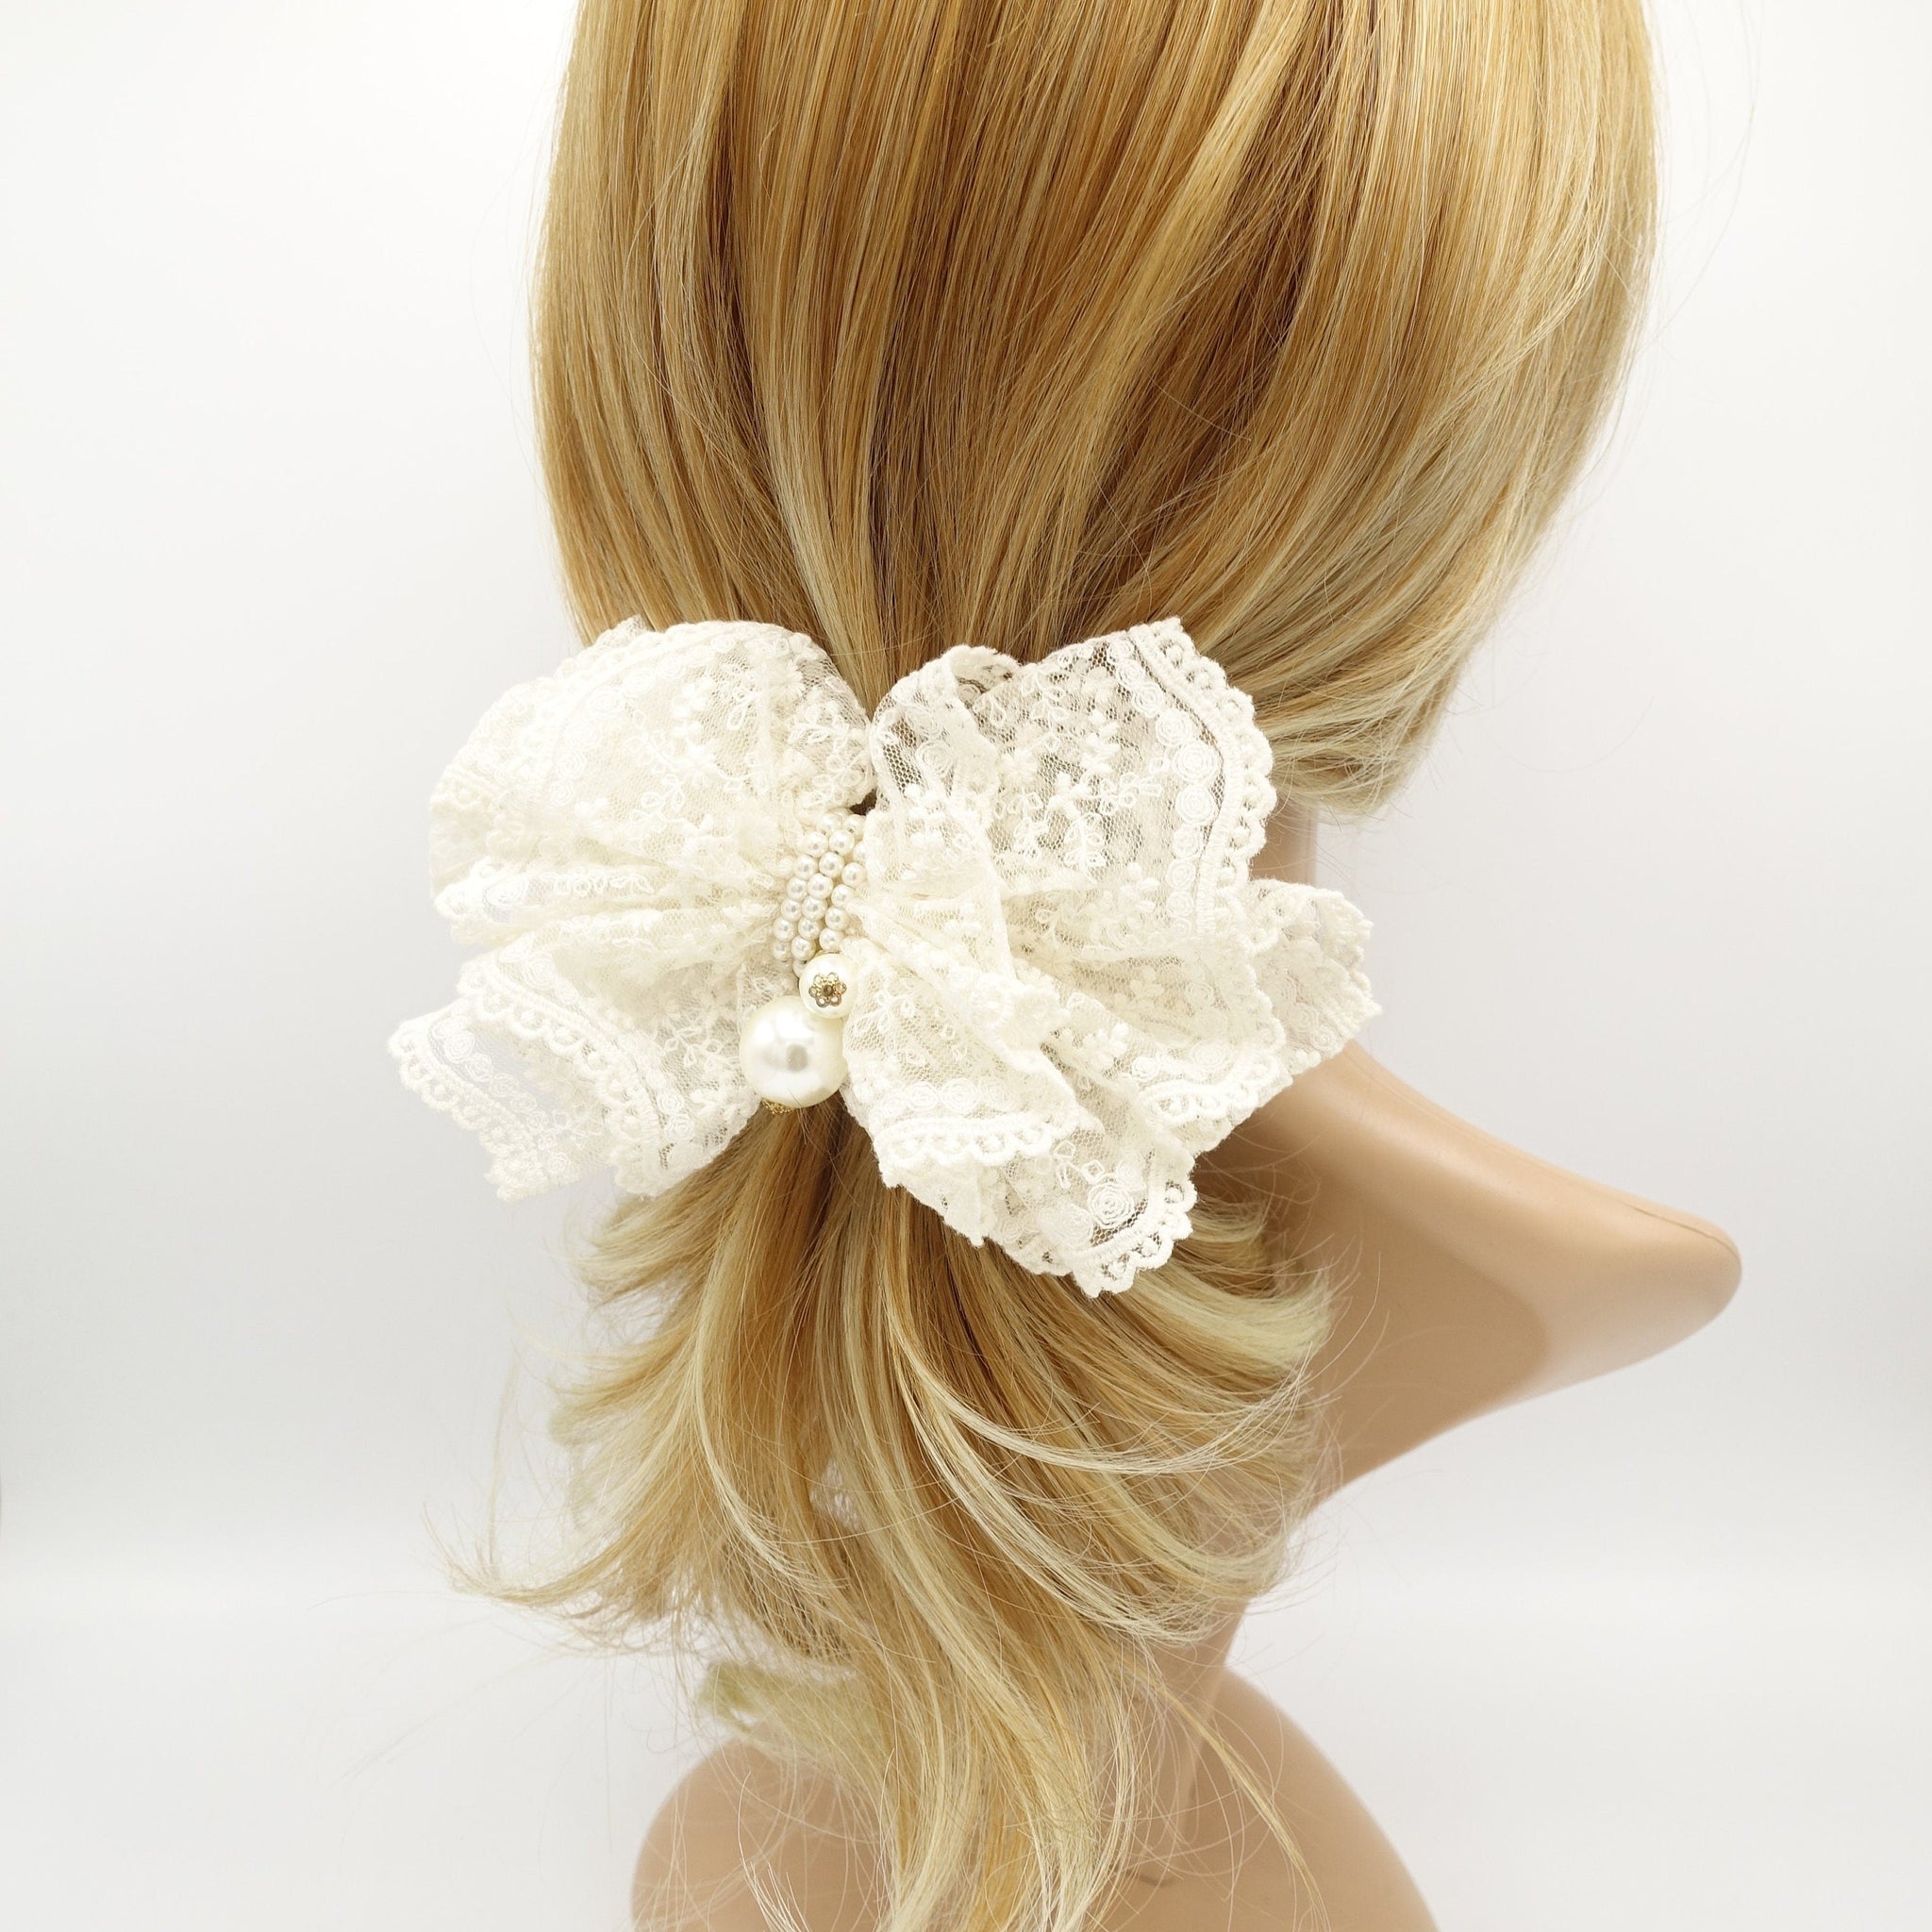 veryshine.com Barrette (Bow) Floral lace layered bow french hair barrette elegant women hair accessory